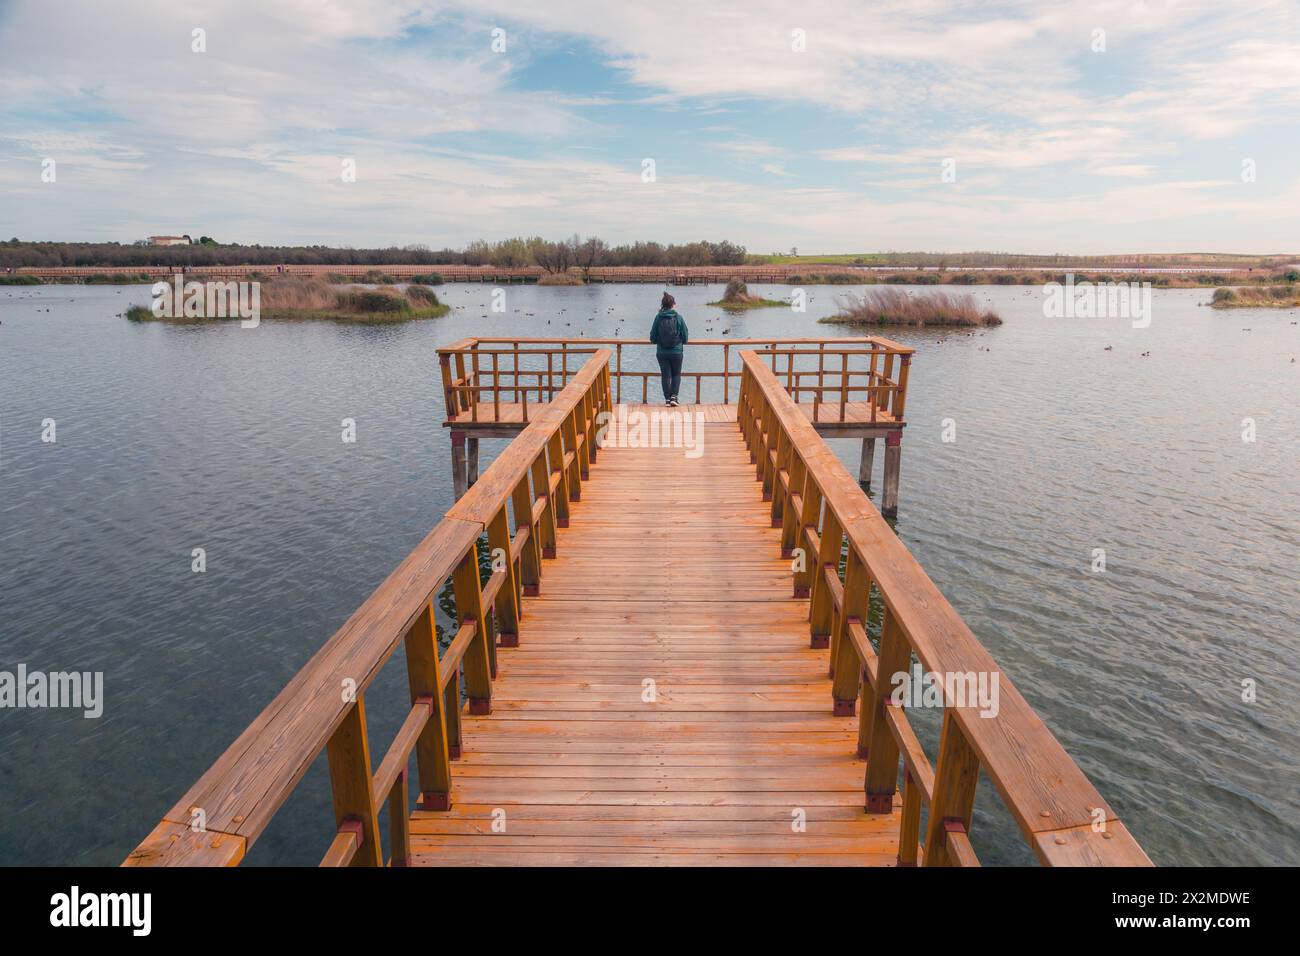 A tranquil scene at Tablas de Daimiel National Park, featuring a wooden boardwalk extending over the water with a person standing at the end, surround Stock Photo